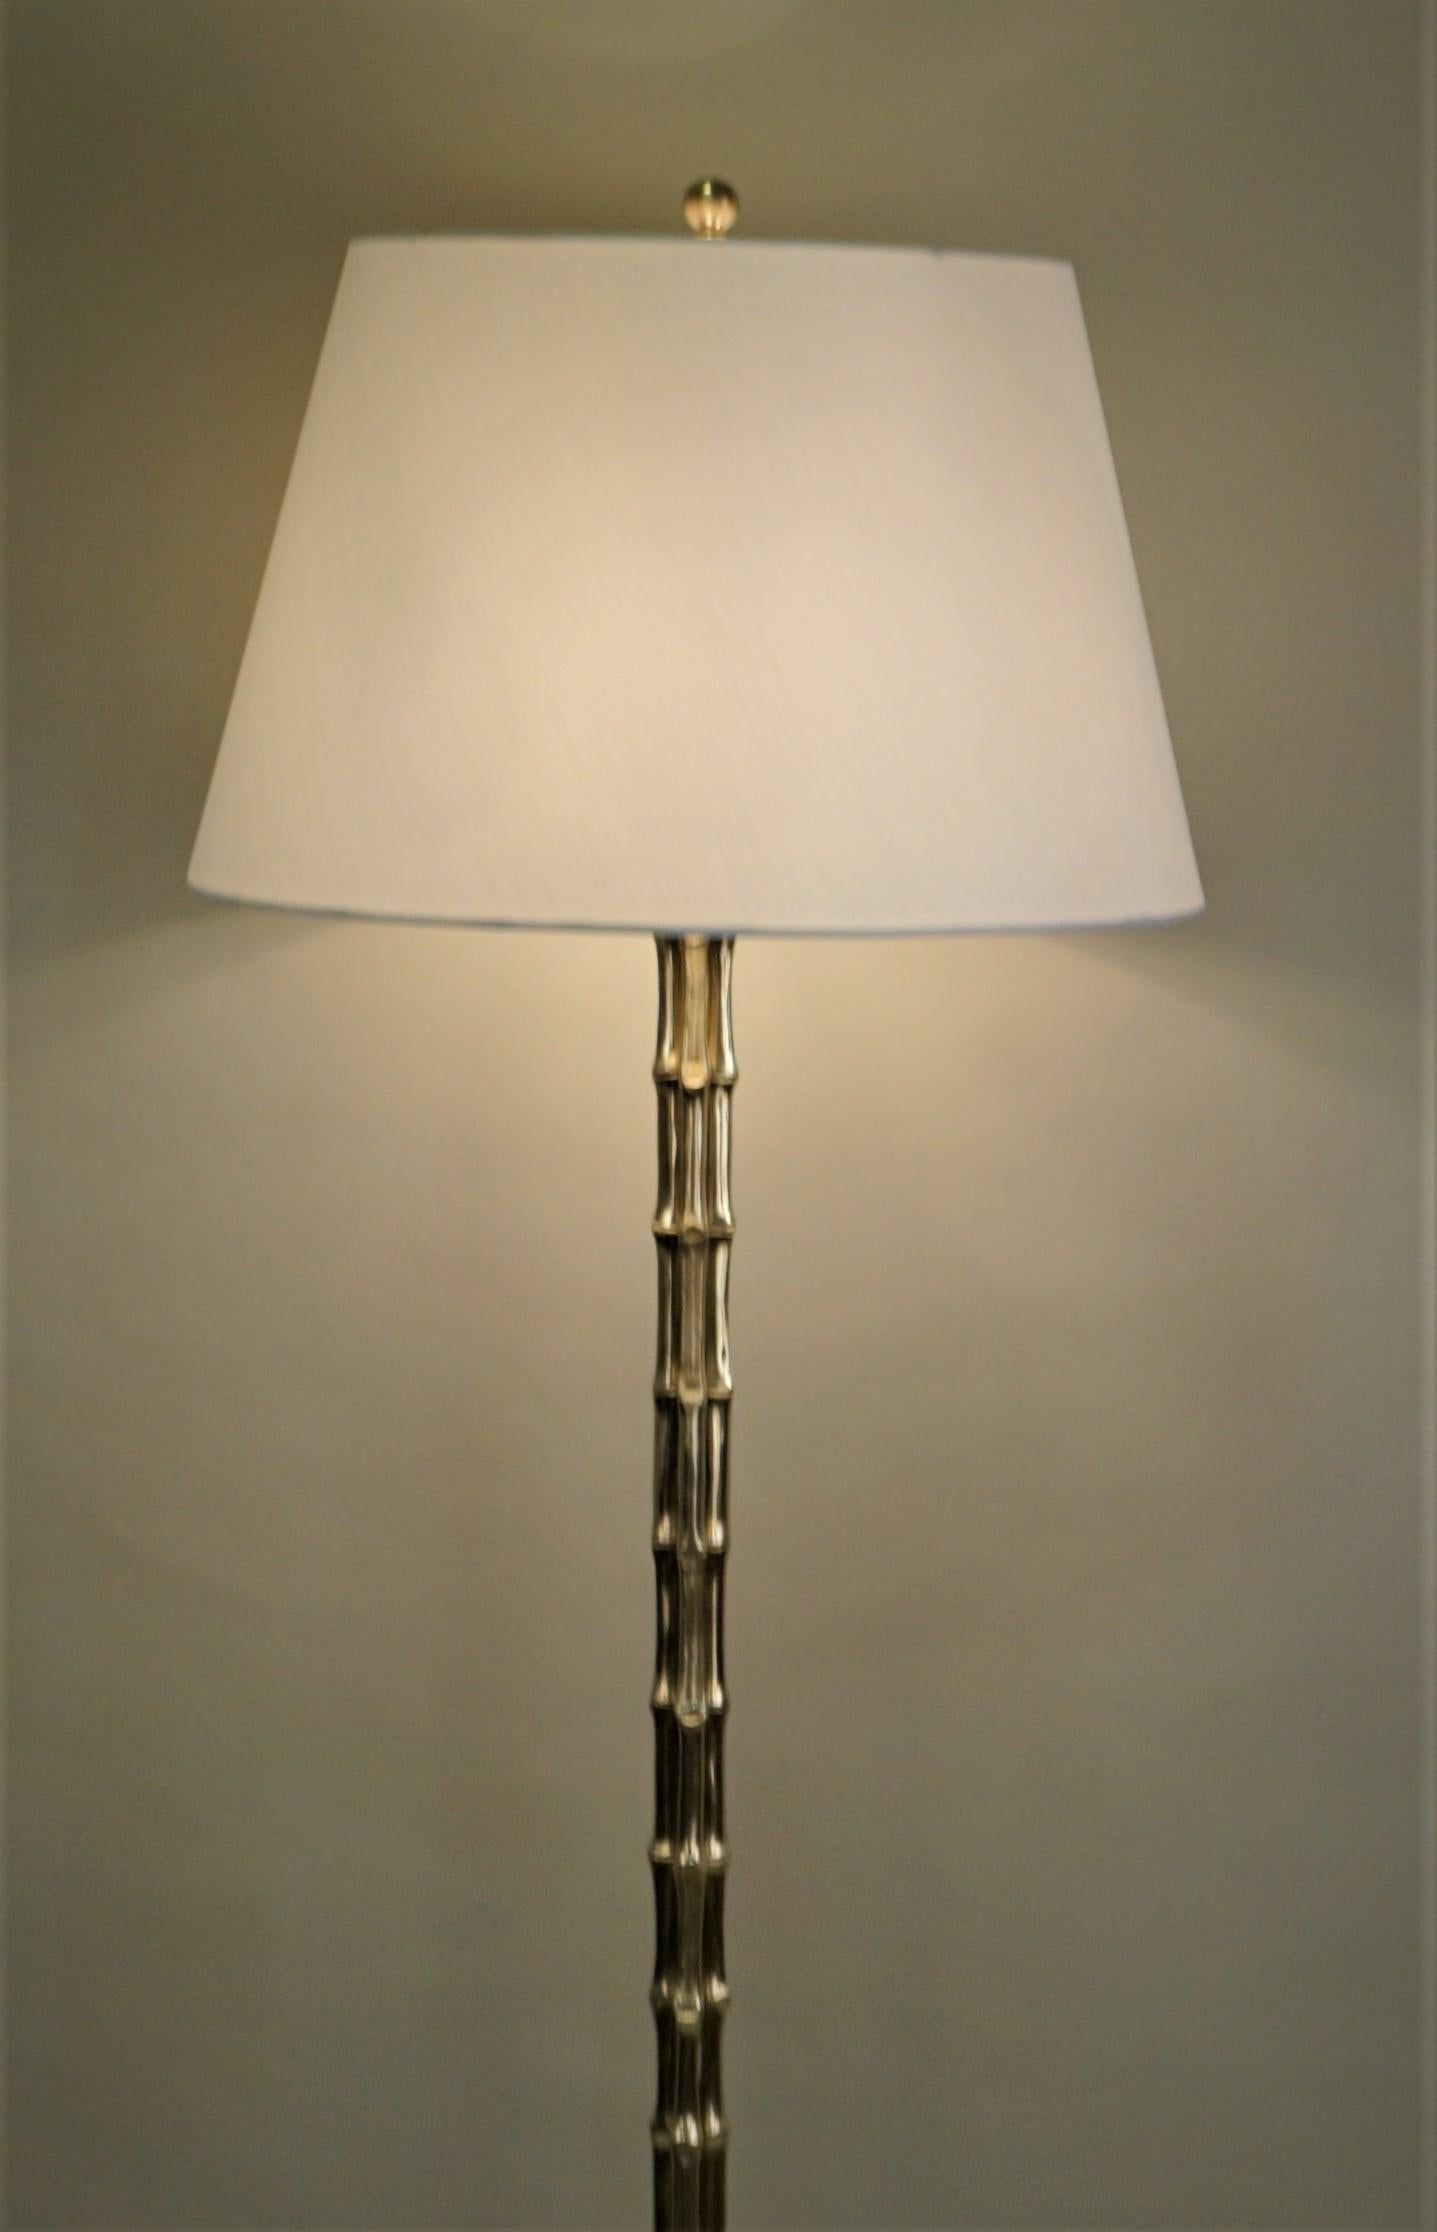 A midcentury bronze faux bamboo floor lamp by Maison Baguès
Modified with three lights, 100 watt each.
Silk hard back lampshade.